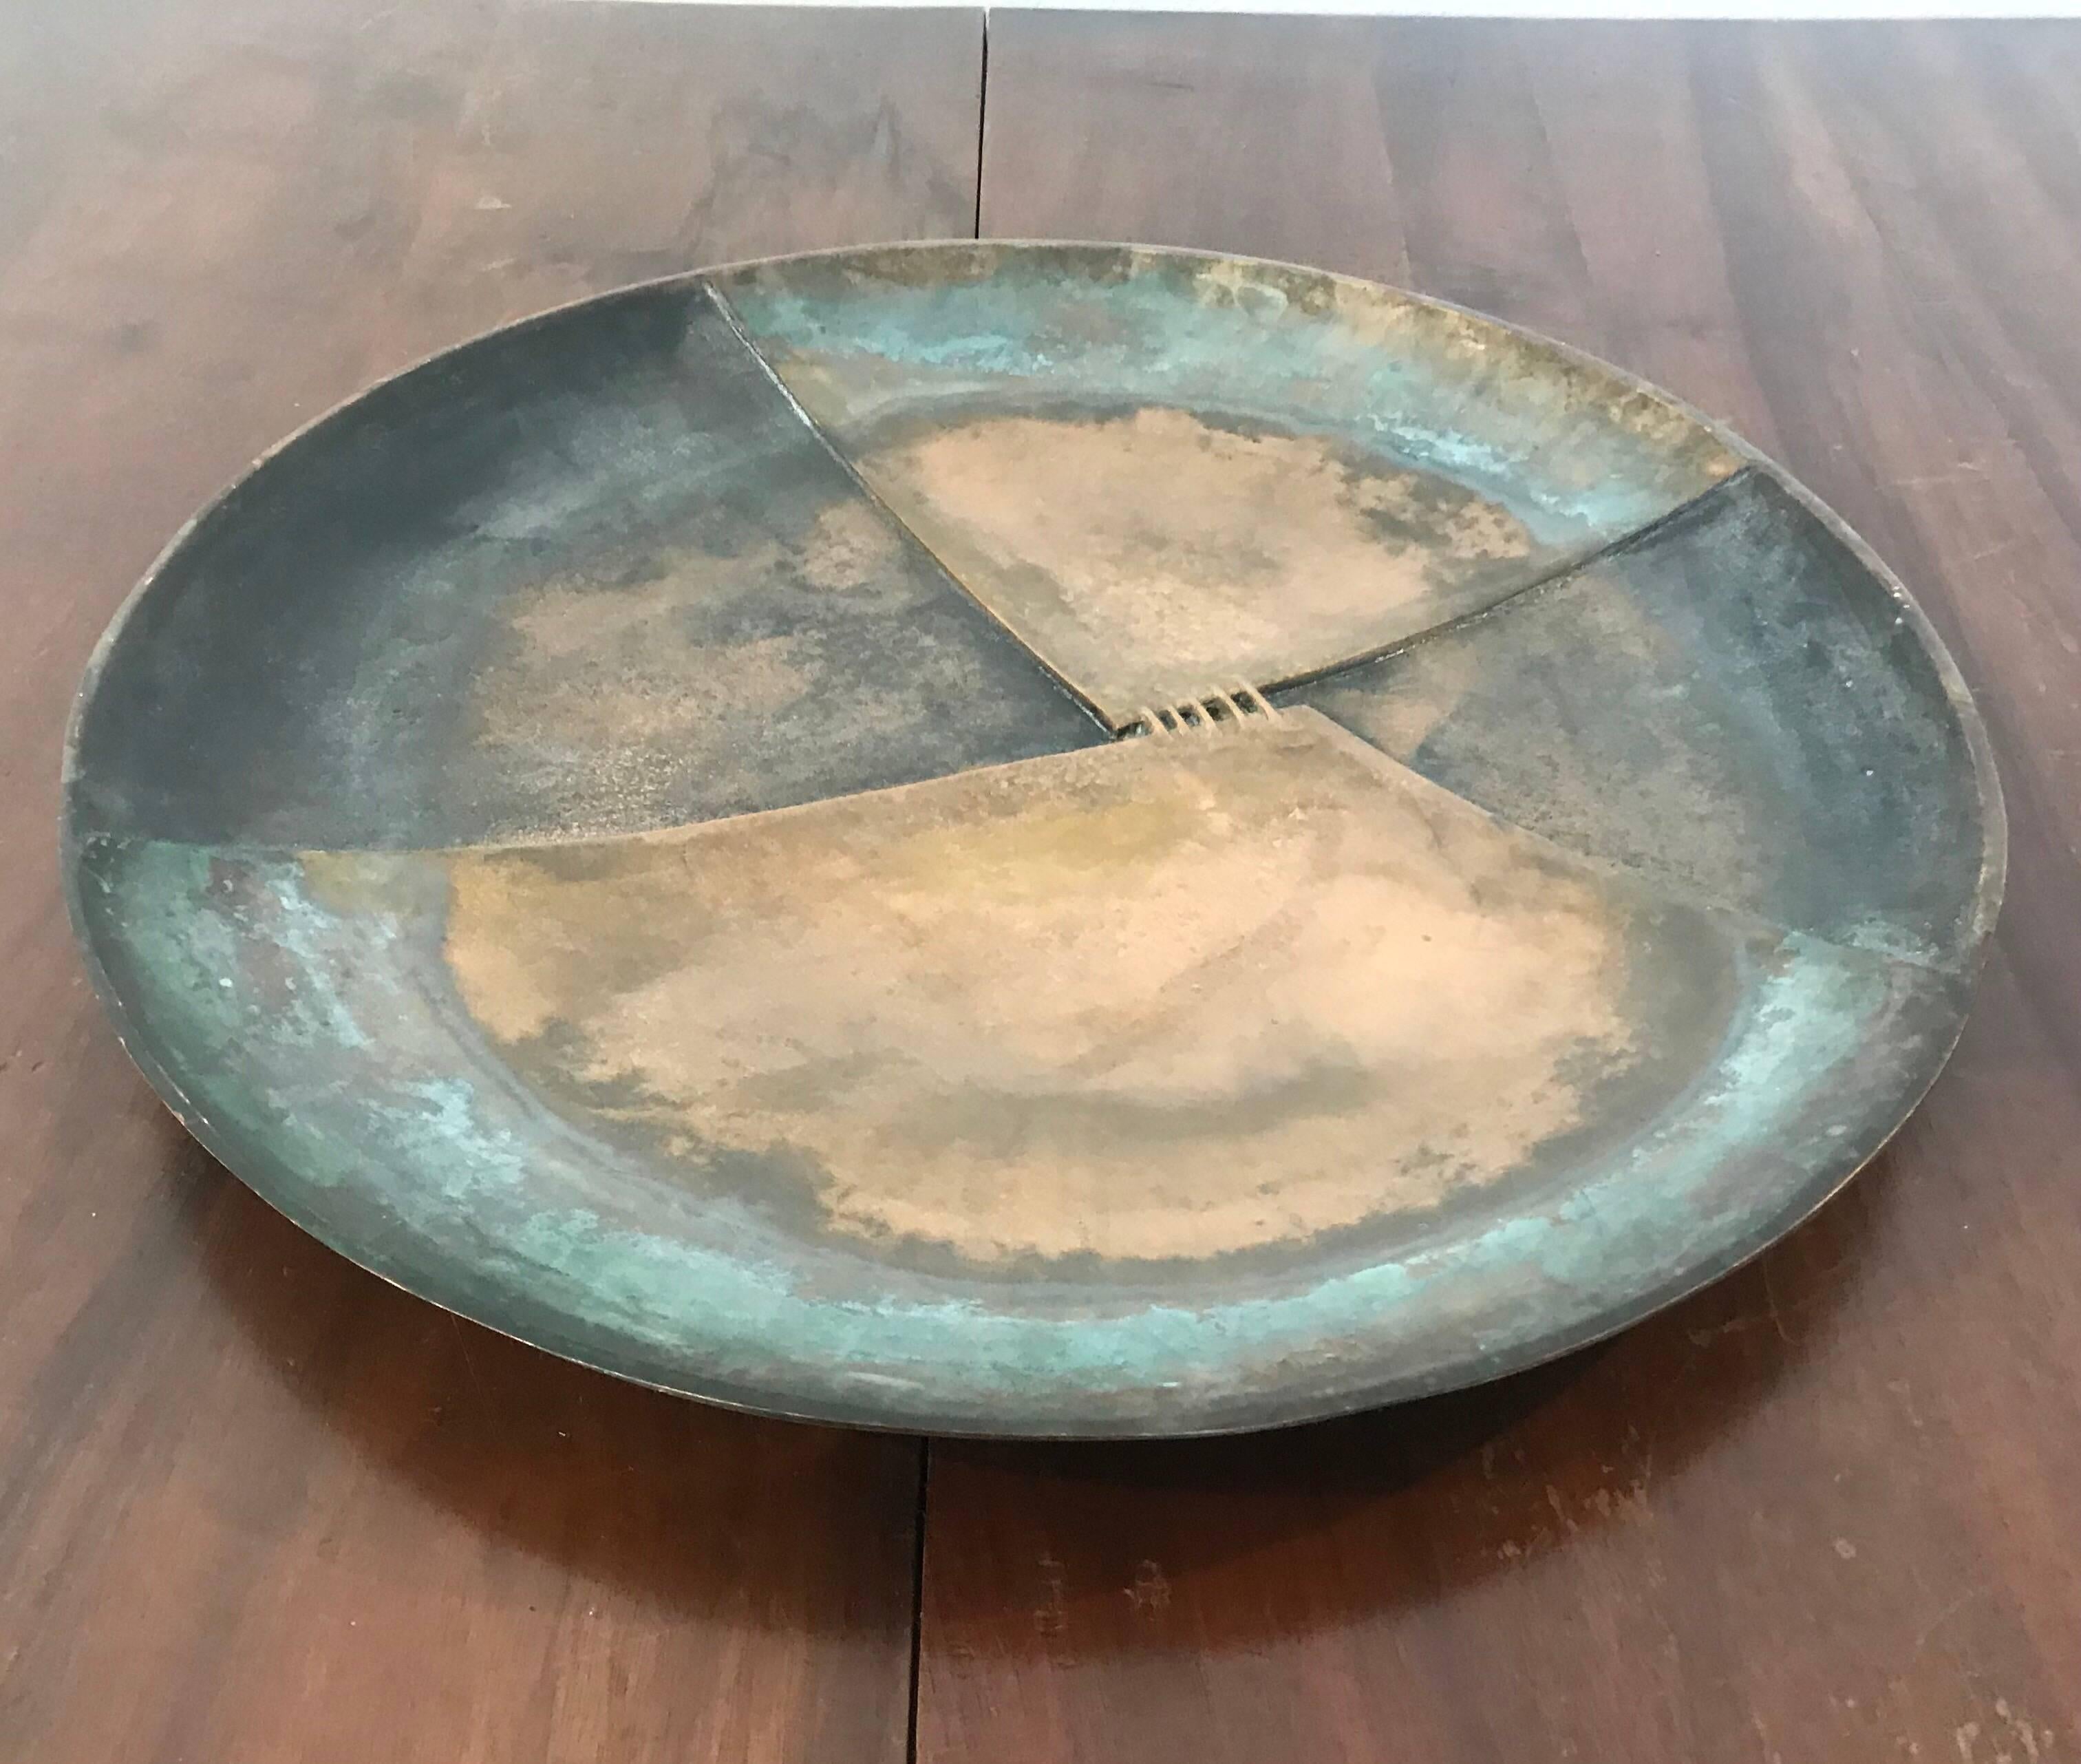 A large sculptural centrepiece by the Italian designer, Esa. The aged bronze has aged with colors of brown and blue/ green. The centre has a cross stitch decoration with the look of between two pieces of leather.